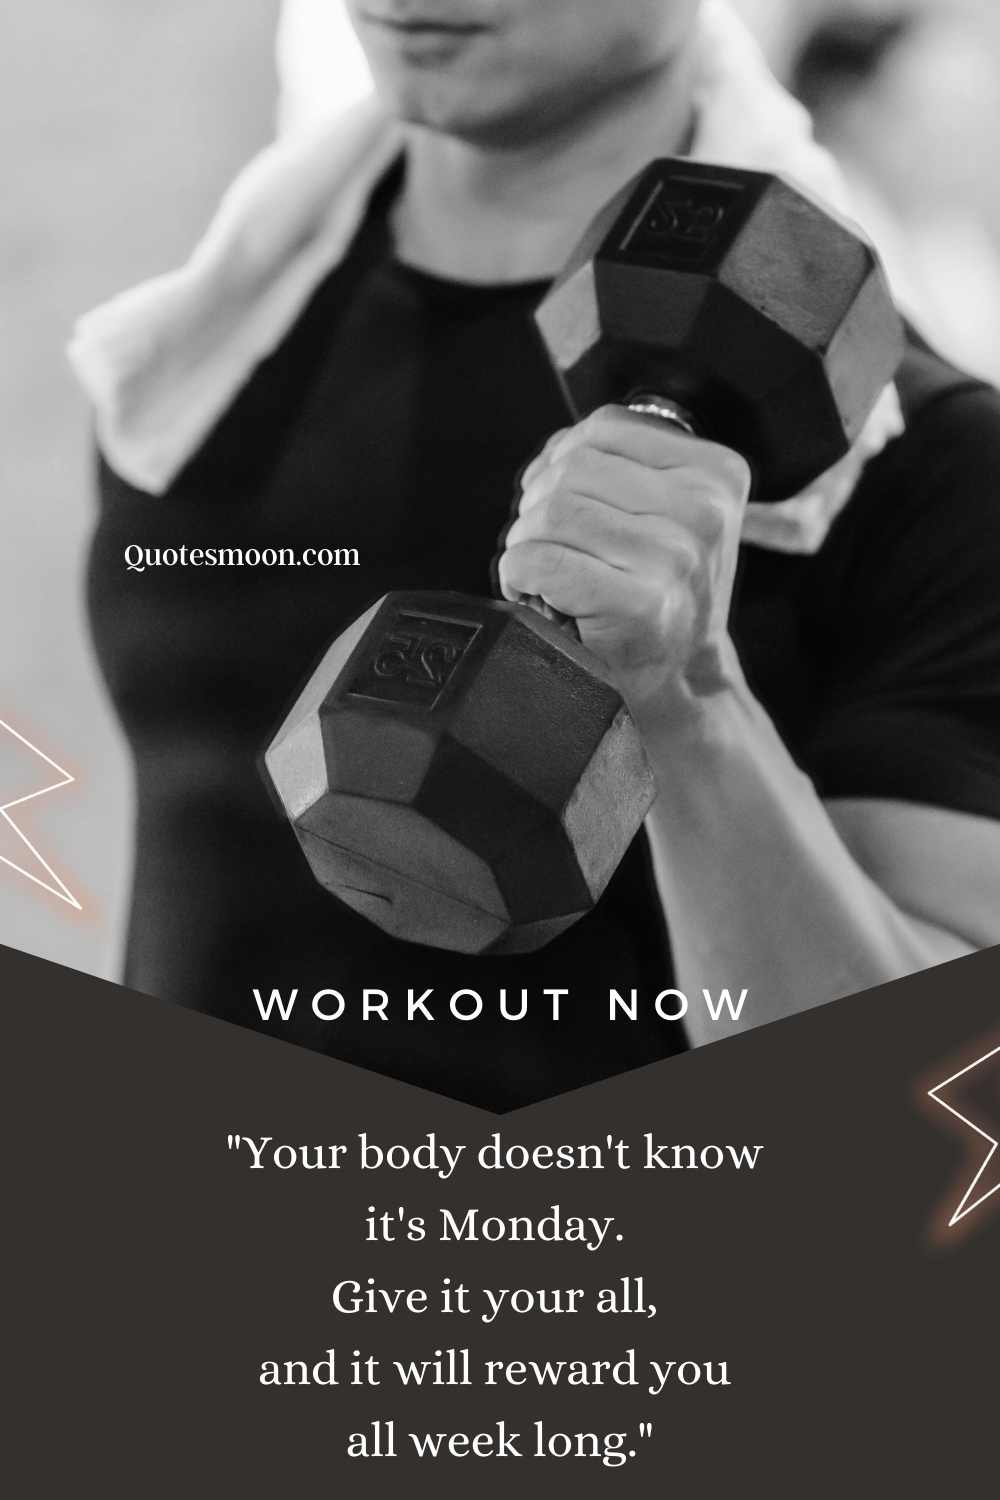 Best Workout Quotes on monday With pictures